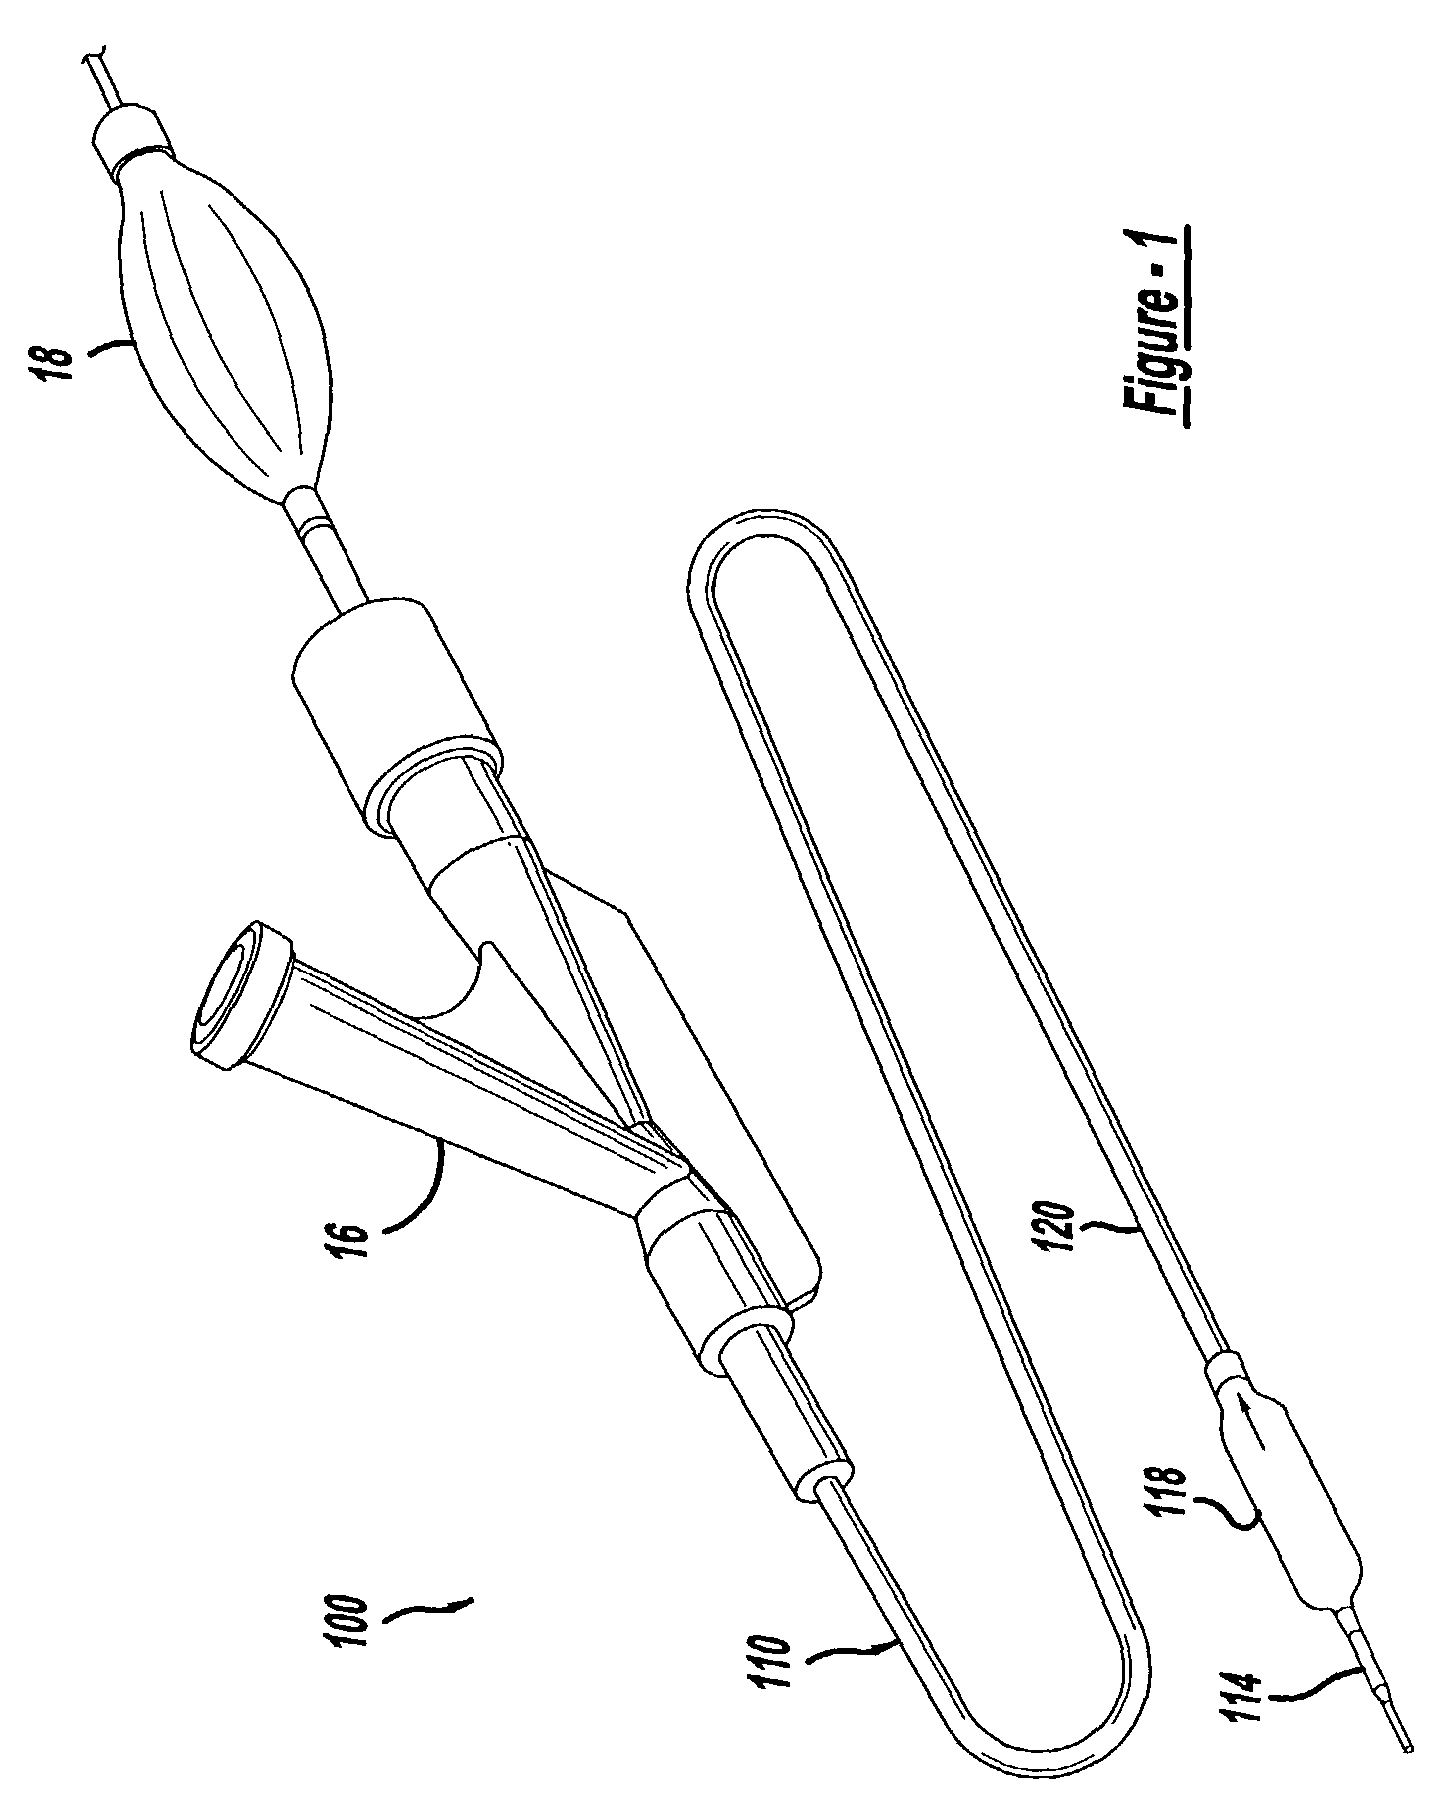 Everting balloon stent delivery system having tapered leading edge